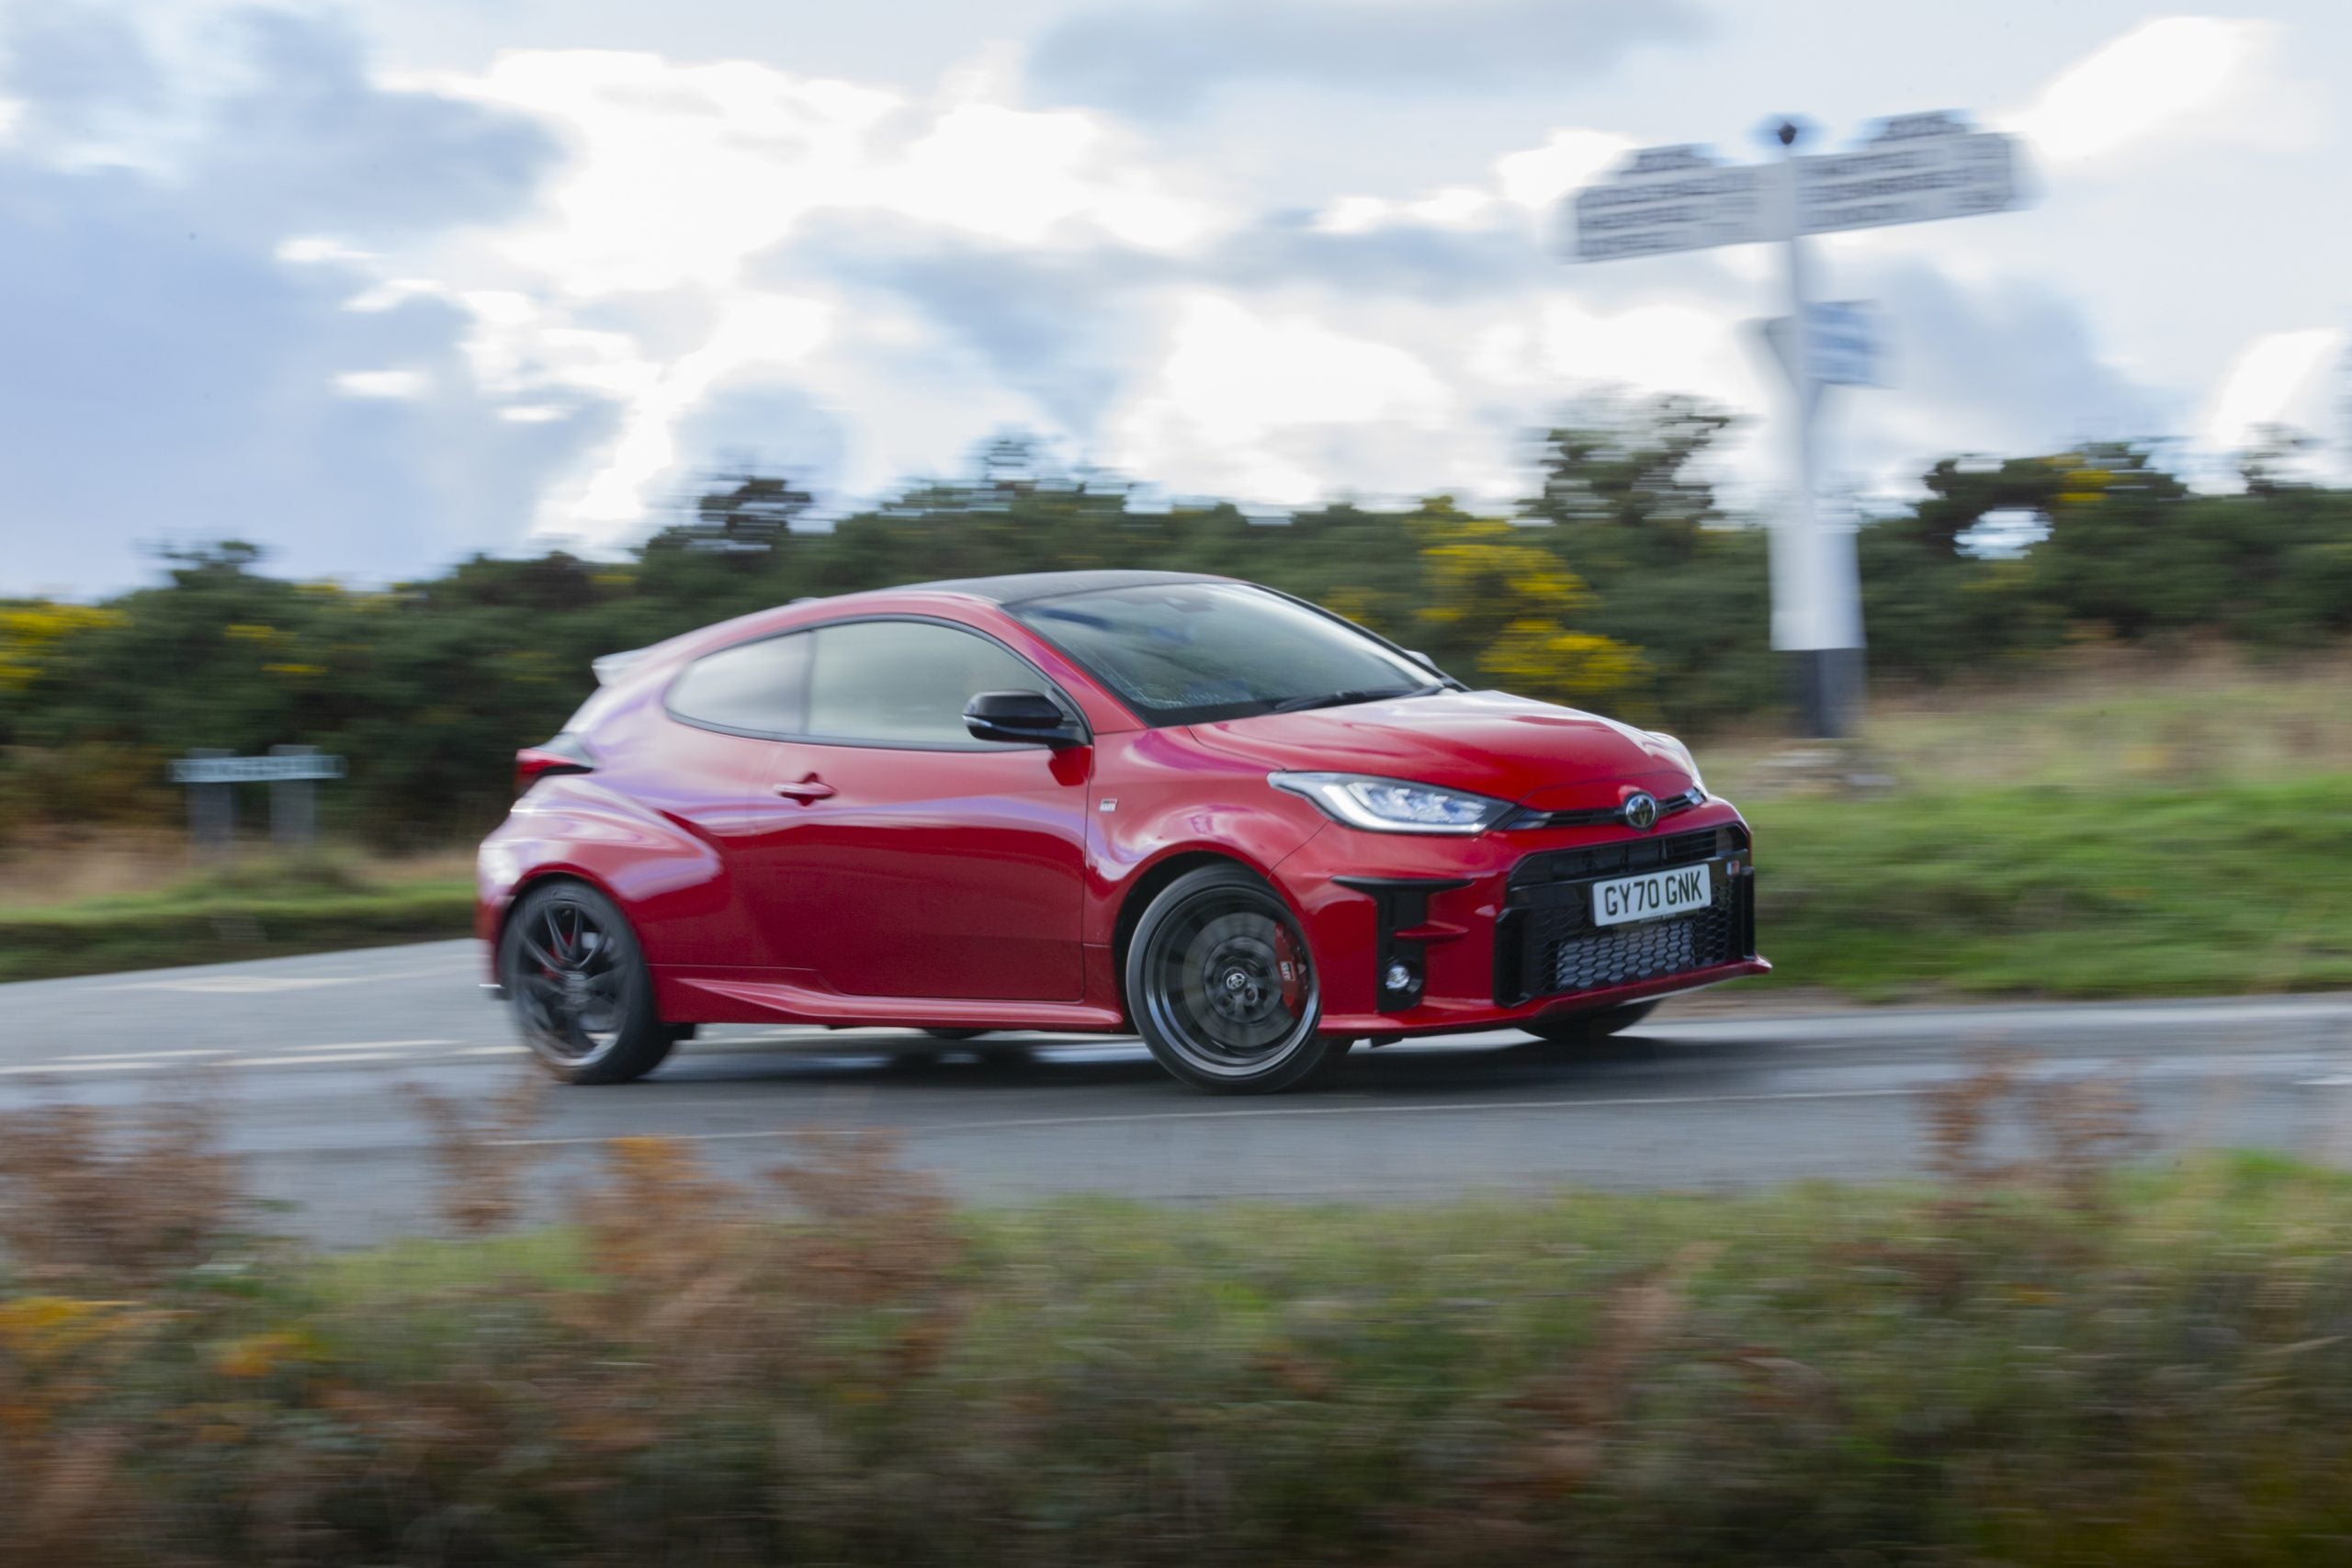 The Yaris GR is an ‘antidote to the SUV boom’